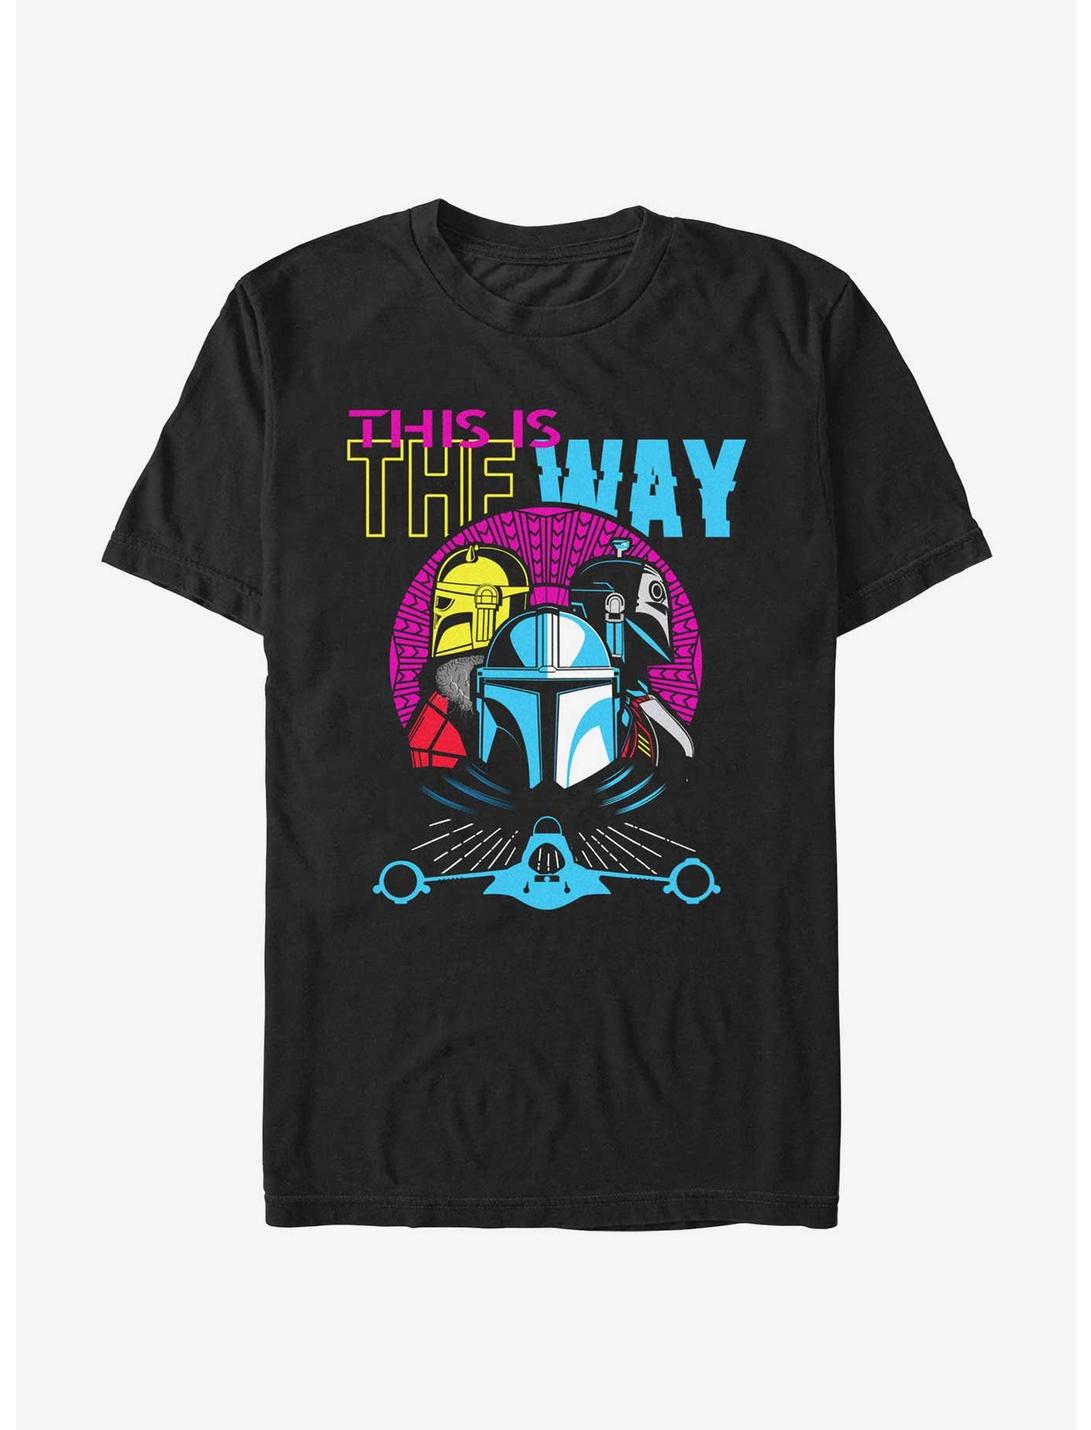 Star Wars The Mandalorian Hyper Sunset This Is The Way T-Shirt, BLACK, hi-res